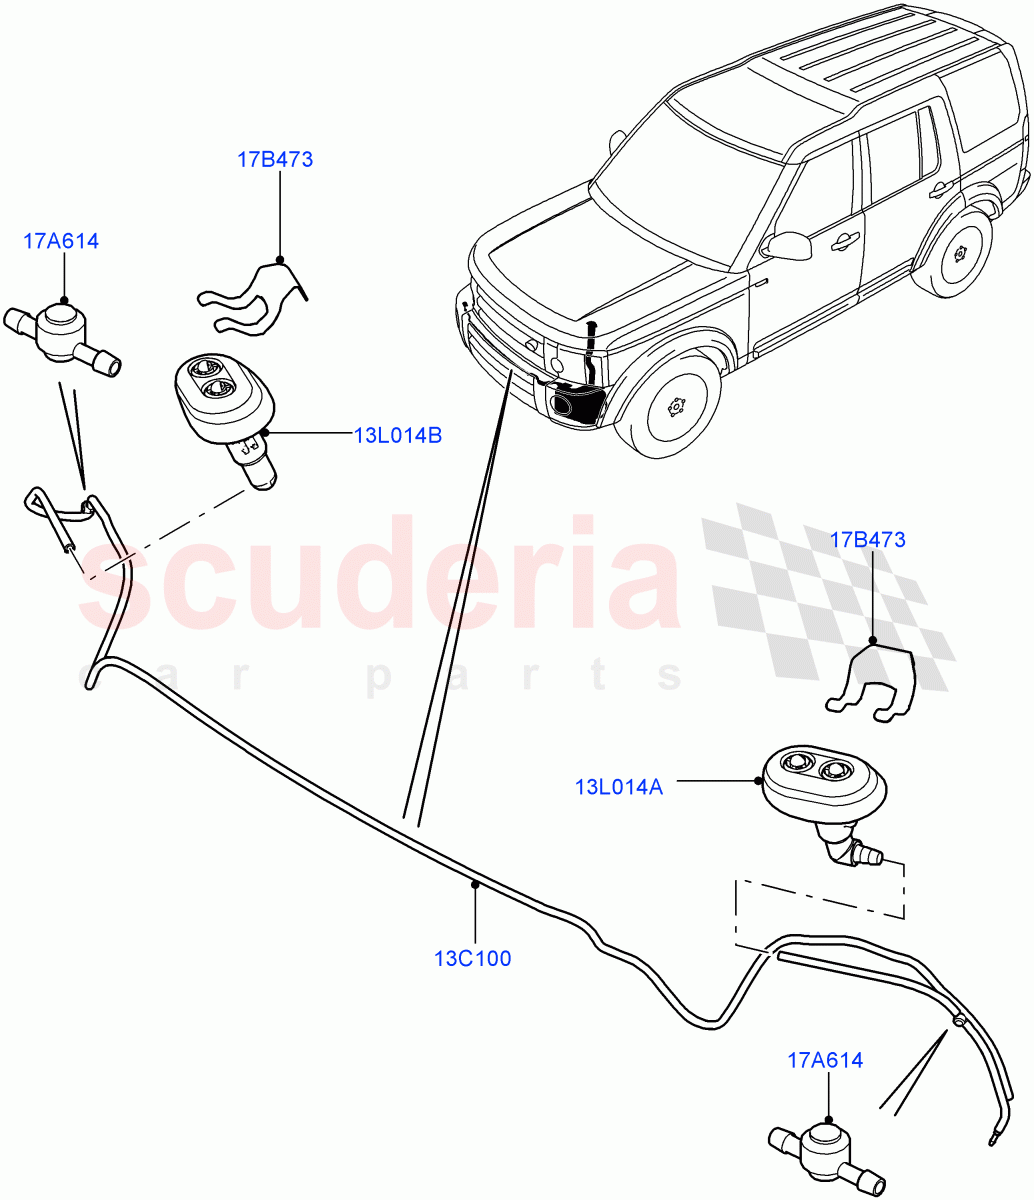 Headlamp Washer((V)FROMAA000001) of Land Rover Land Rover Discovery 4 (2010-2016) [3.0 DOHC GDI SC V6 Petrol]